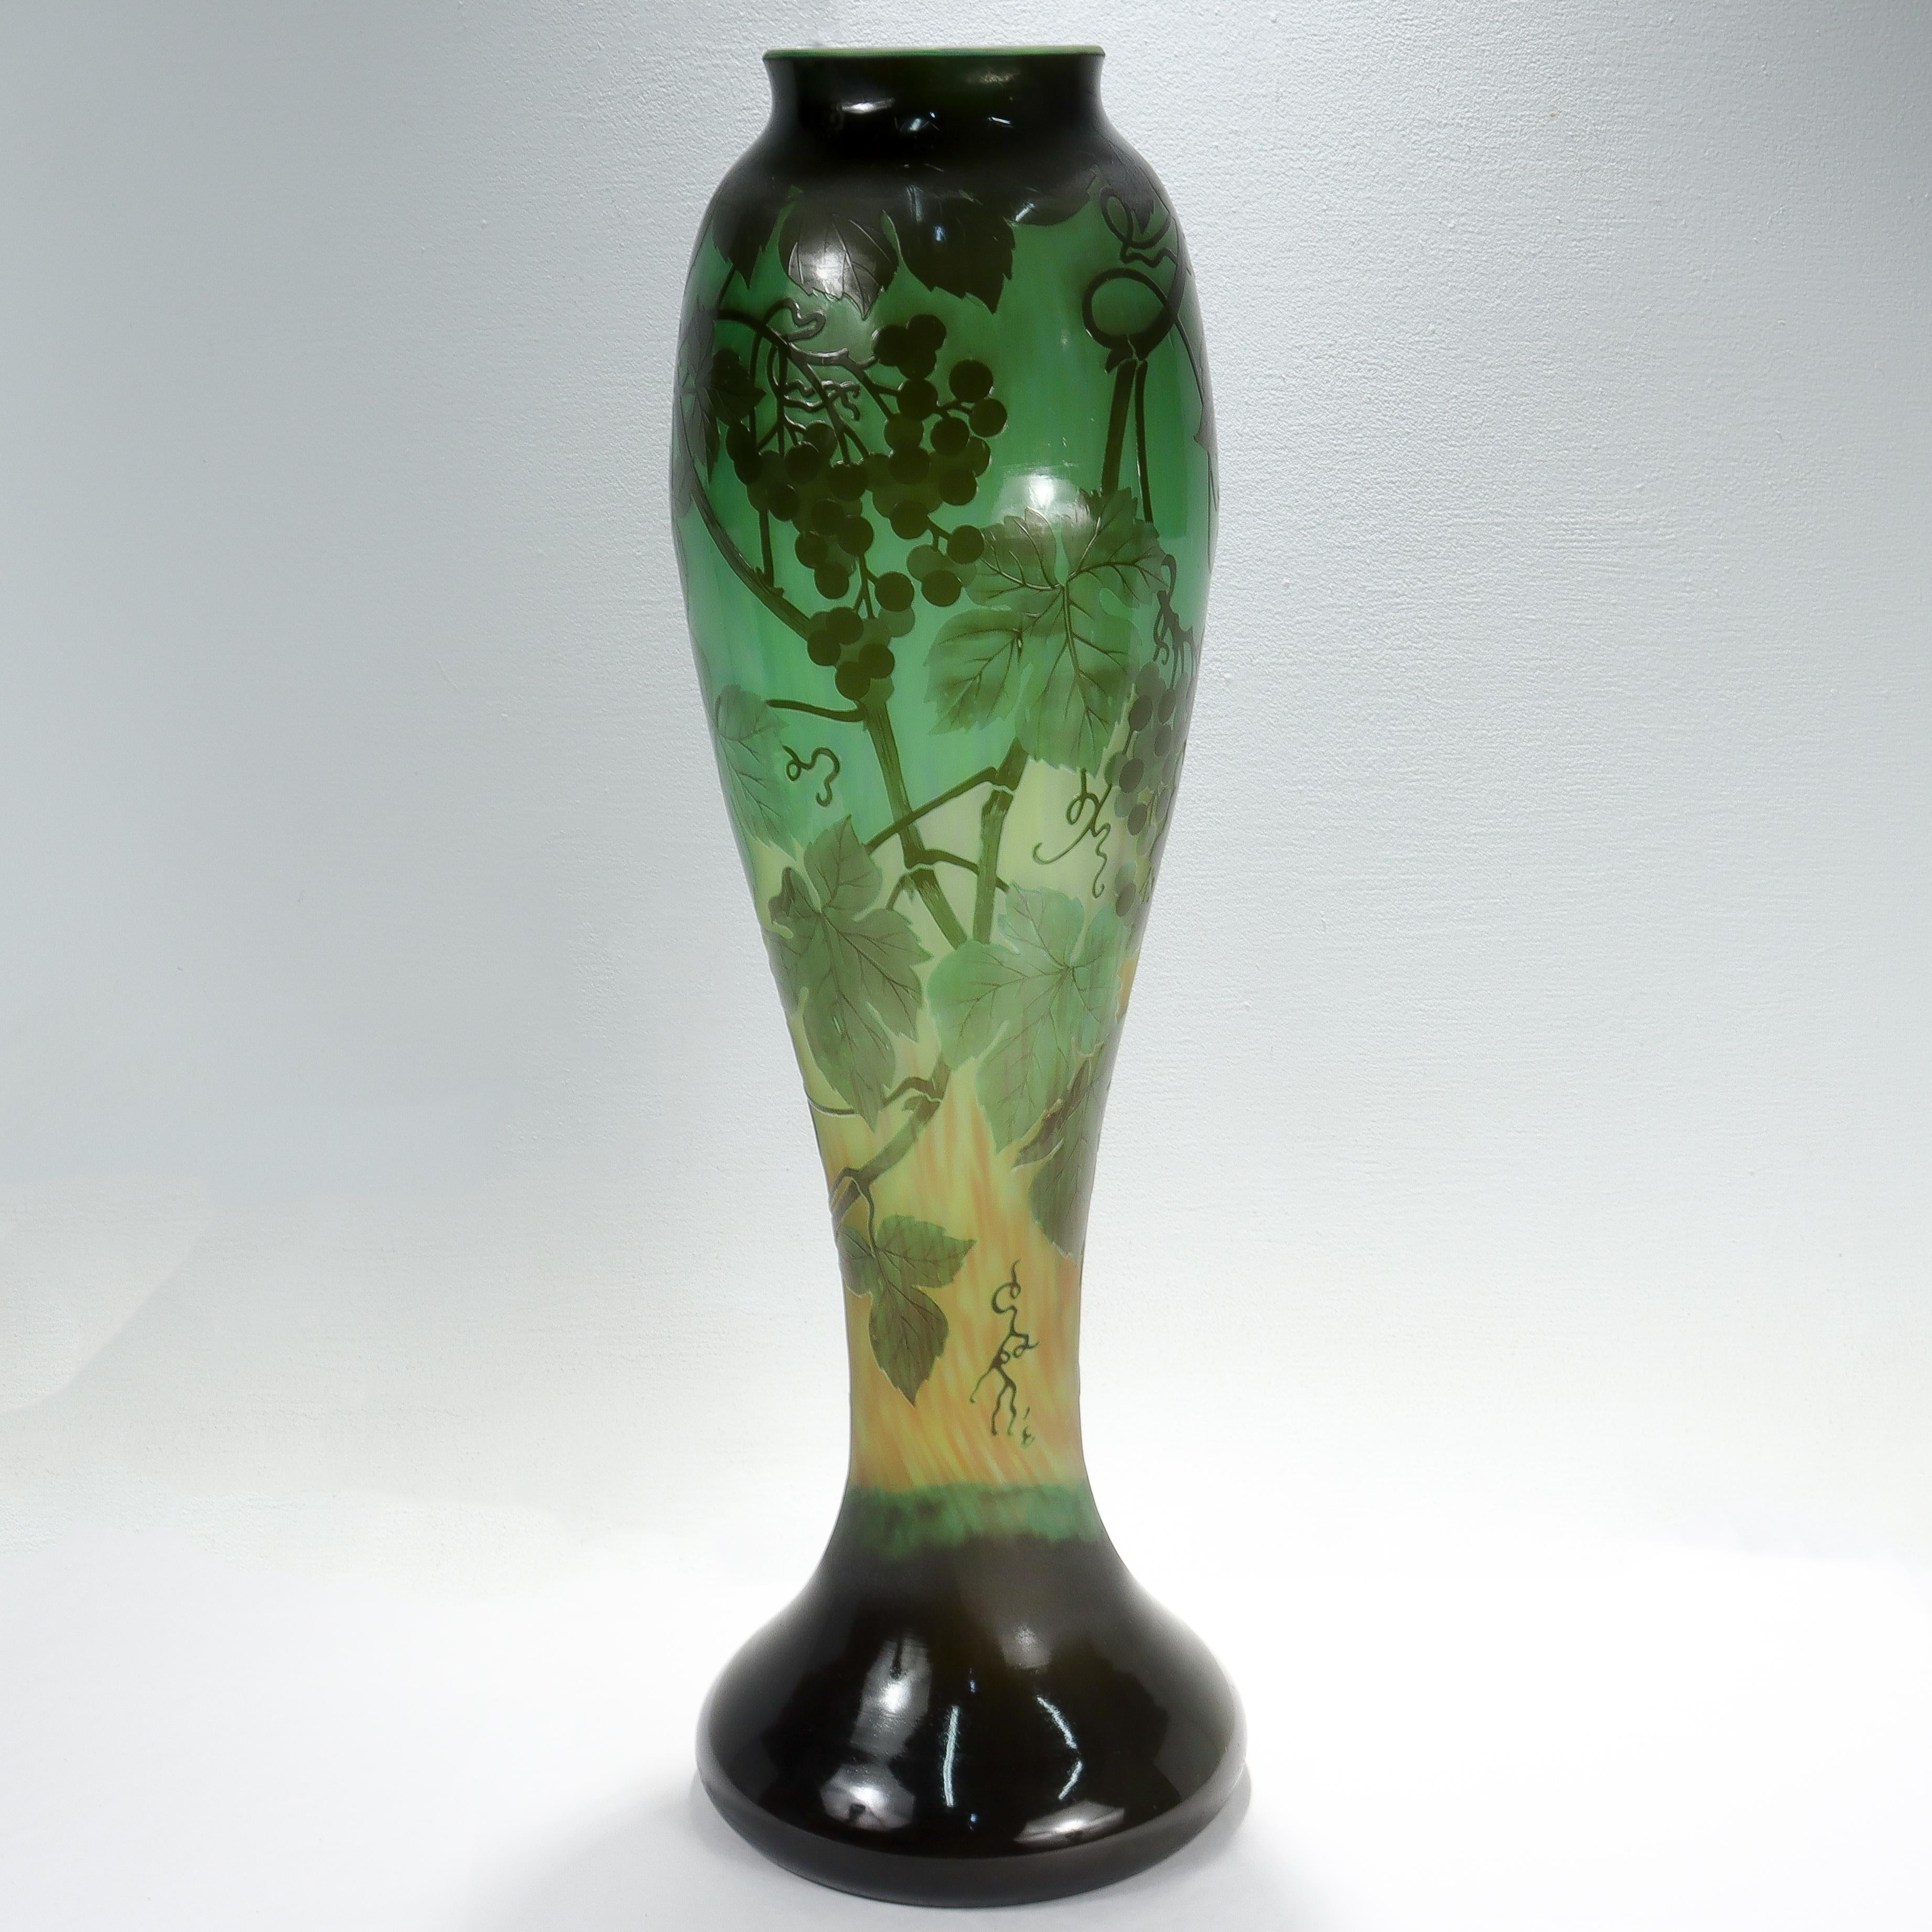 A fine, very large scale antique French art glass vase.

In green tones.

With acid-cut back cameo grapes, grape leaves, & vines.

Signed 